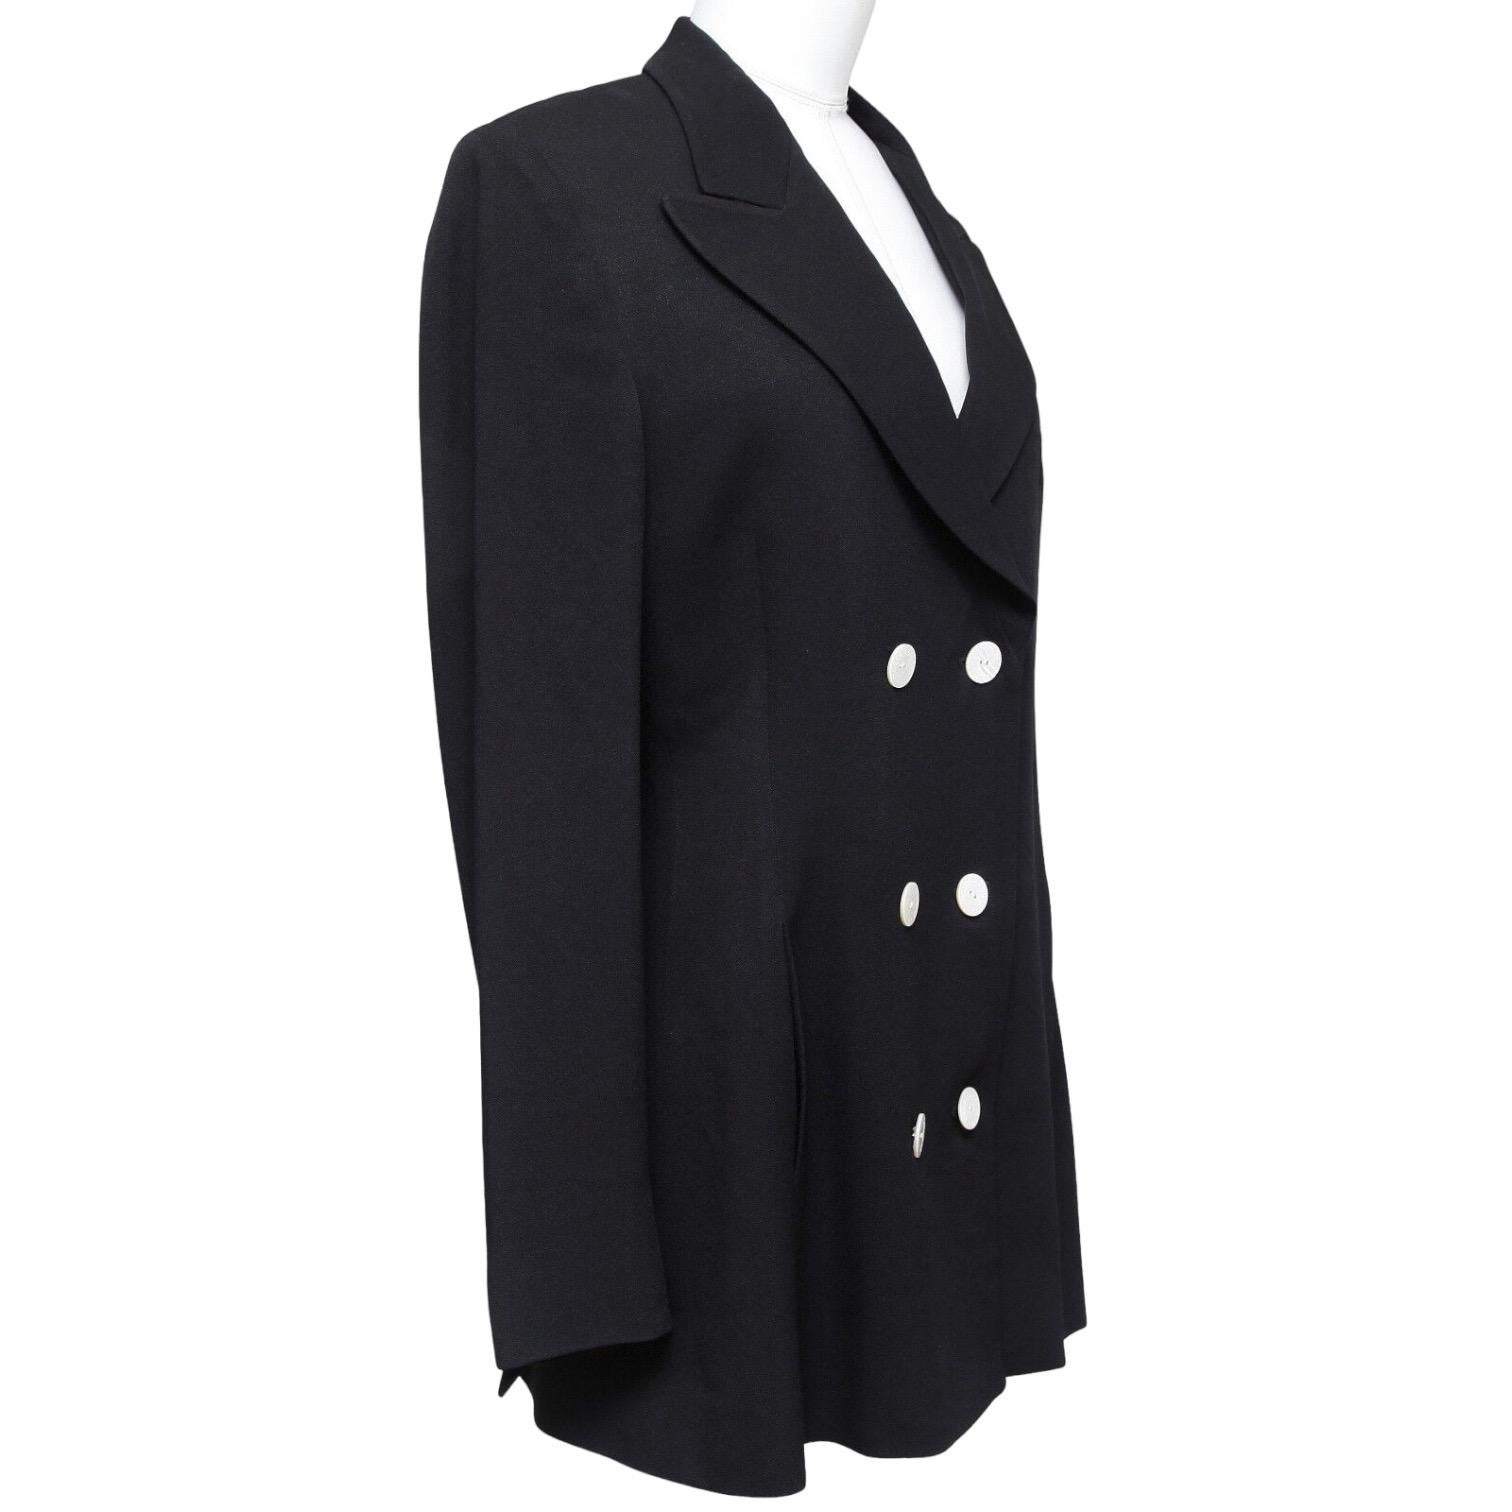 GUARANTEED AUTHENTIC DOLCE & GABBANA BLACK DOUBLE BREASTED BLAZER



Design:
• Double breasted blazer in a classic black color.
• Notched lapel.
• Long sleeve.
• Dual front vertical slip pockets.
• Mother of Pearl buttons.
• Double rear vent.
•